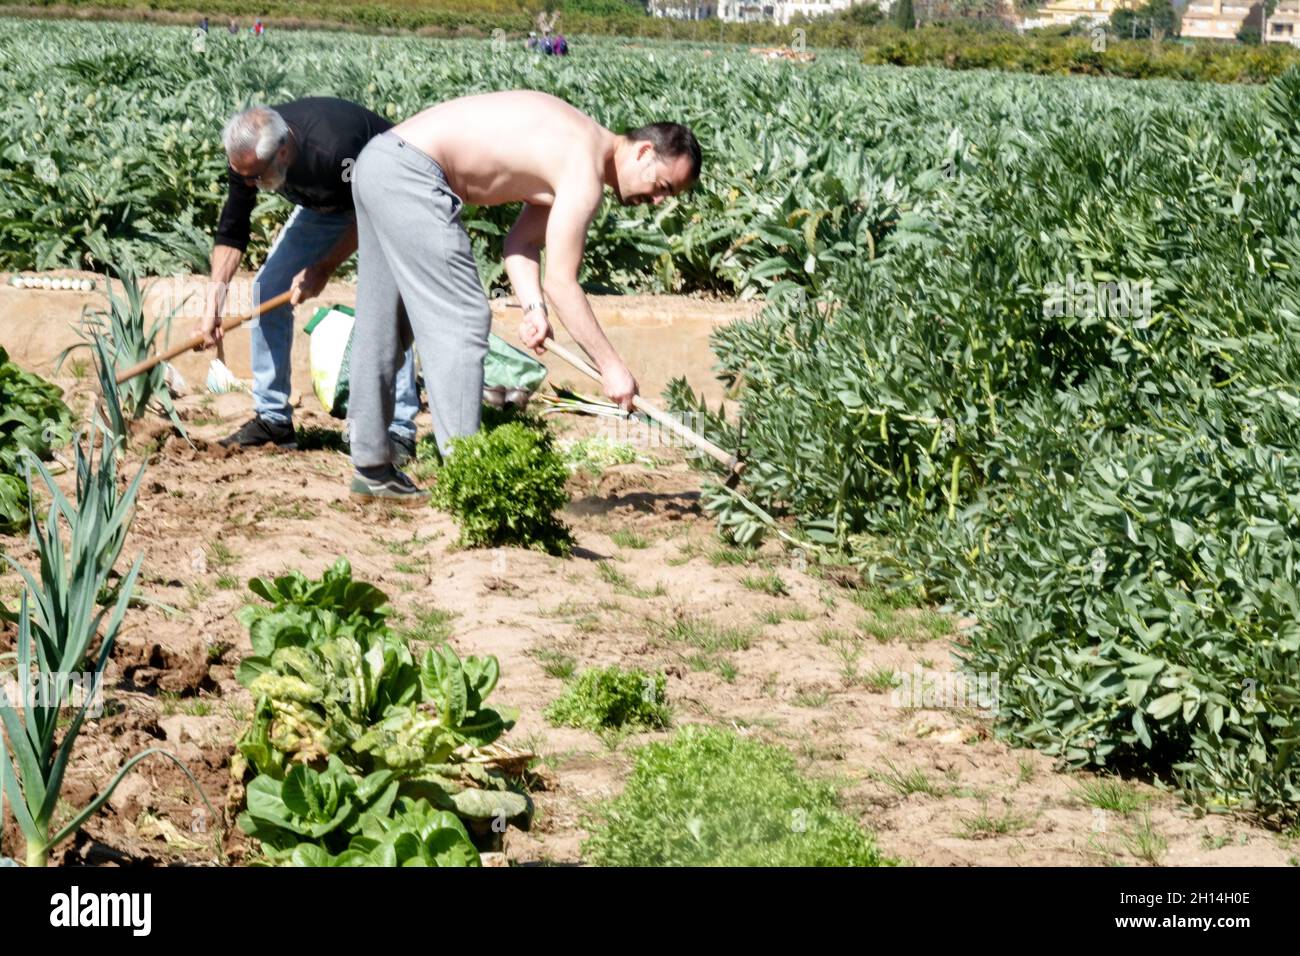 Two agricultural workers Spain Comunidad Valenciana farmers Stock Photo